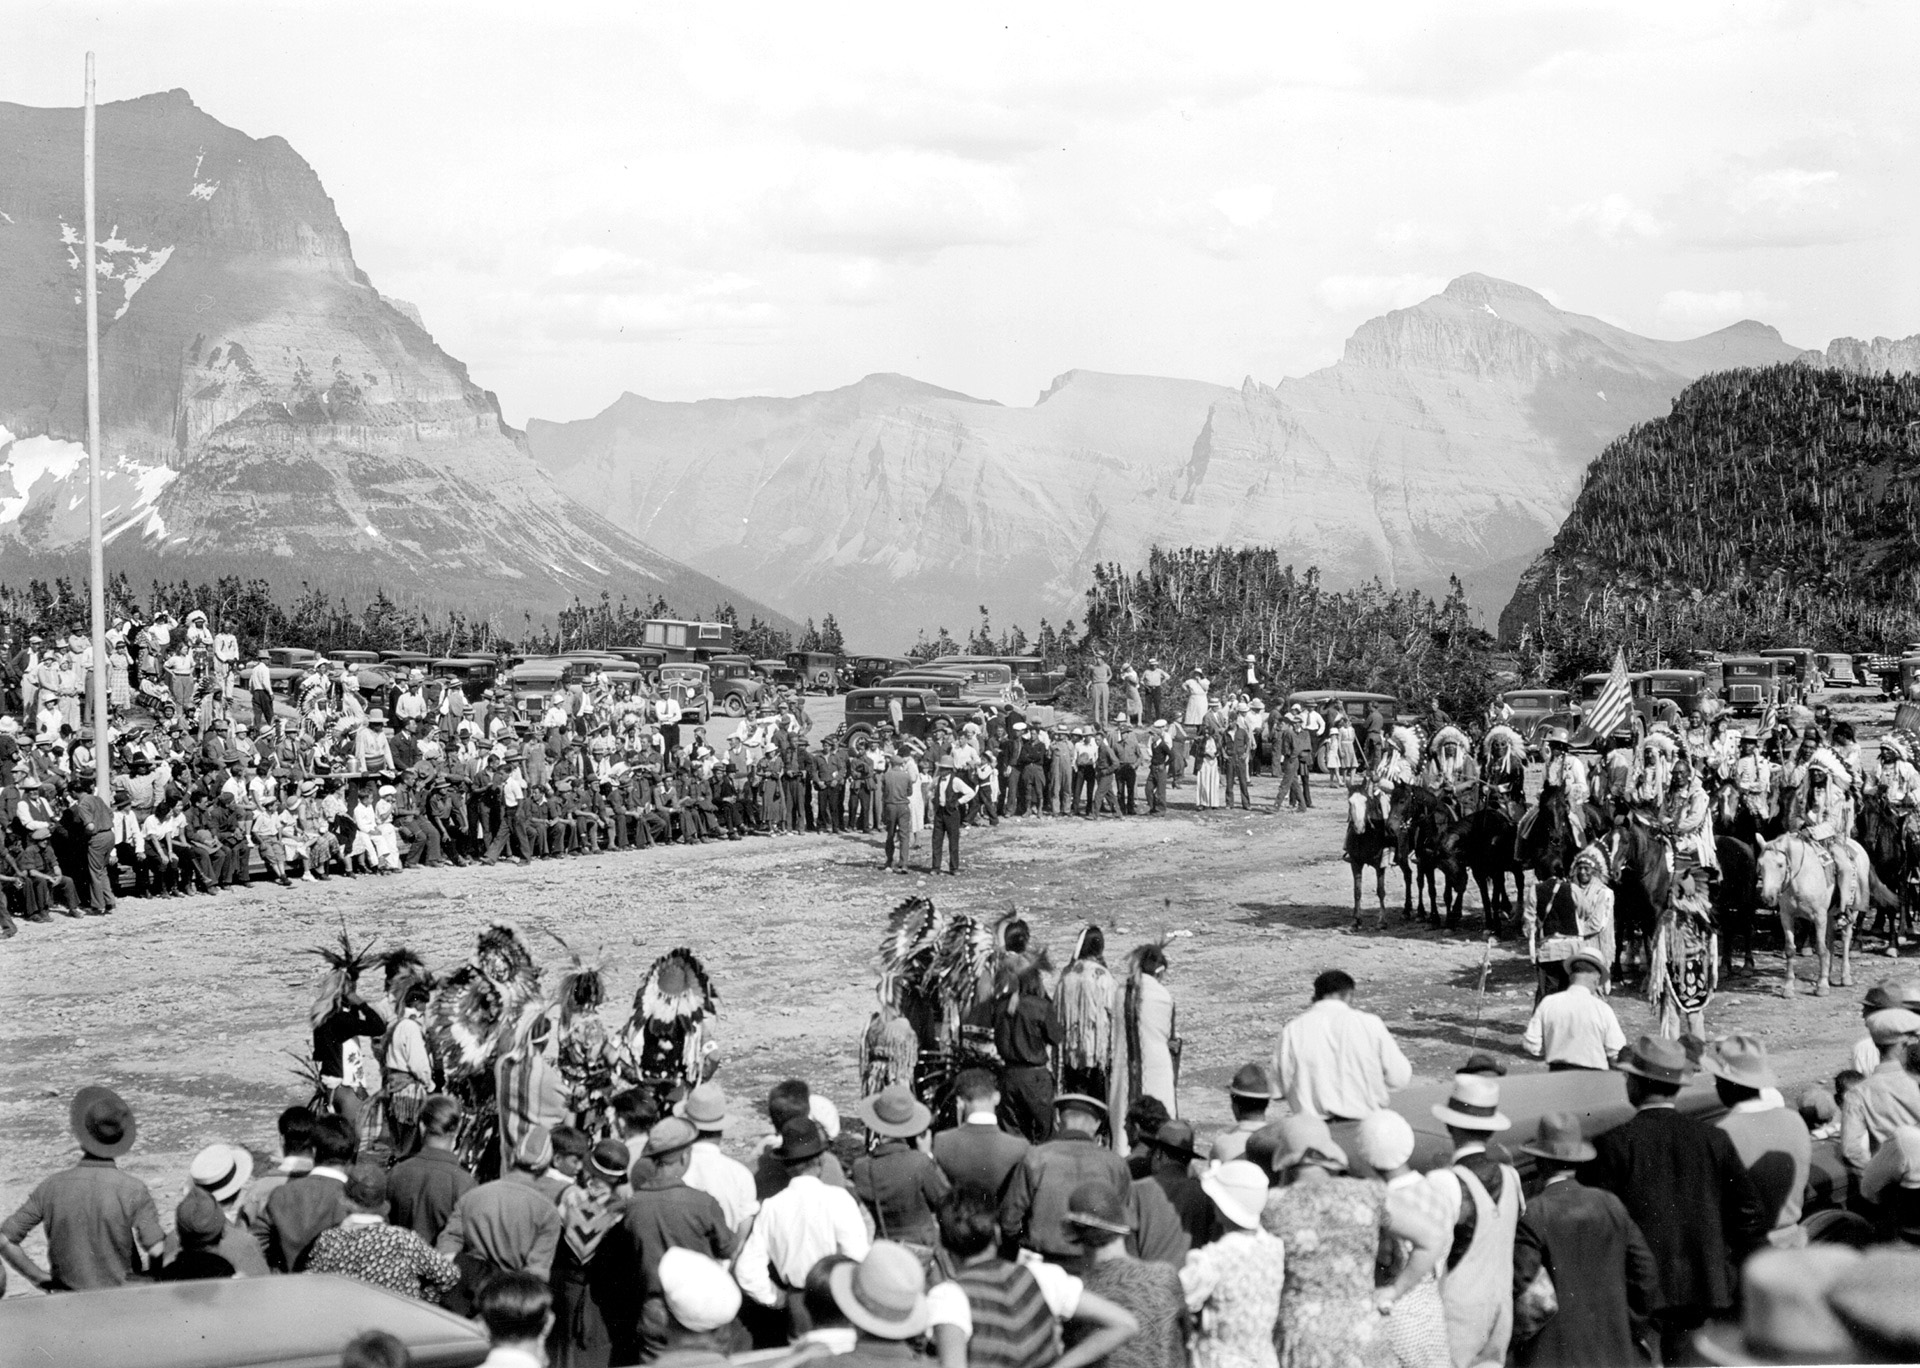 Over 4,000 people attended the dedication ceremony on July 15, 1933. (Glacier National Park Archives)